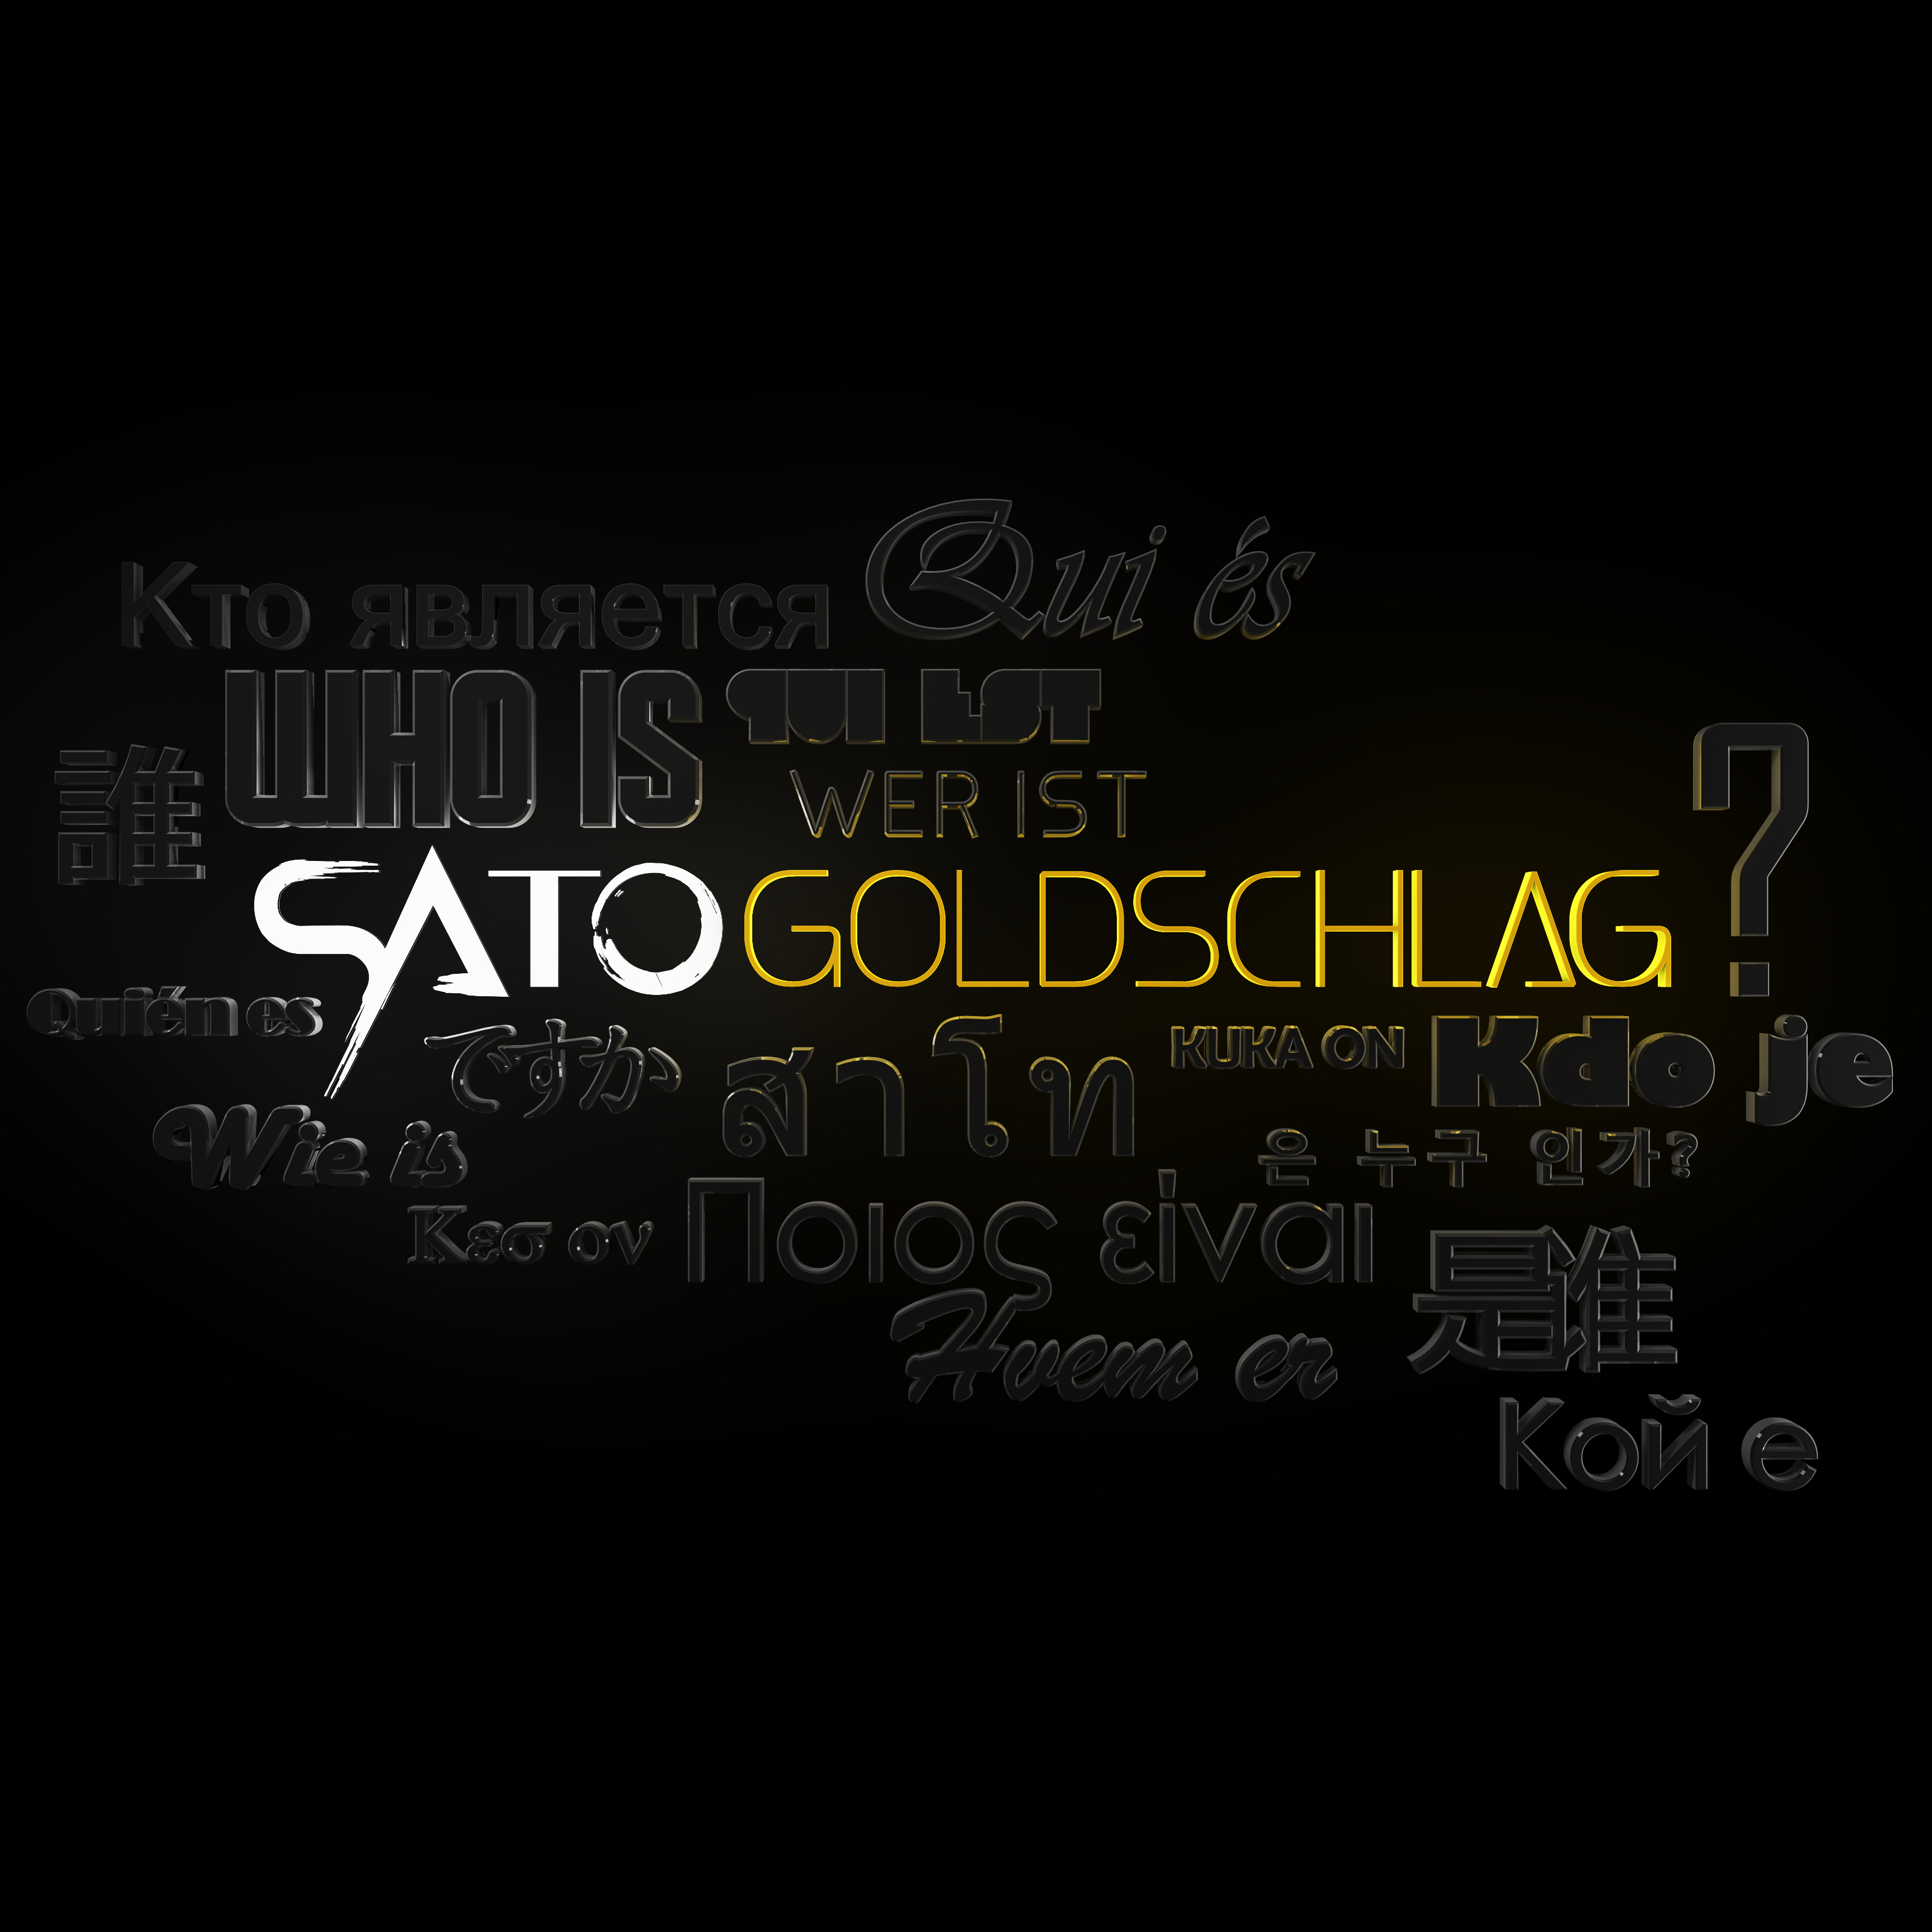 Who Is Sato Goldschlag?